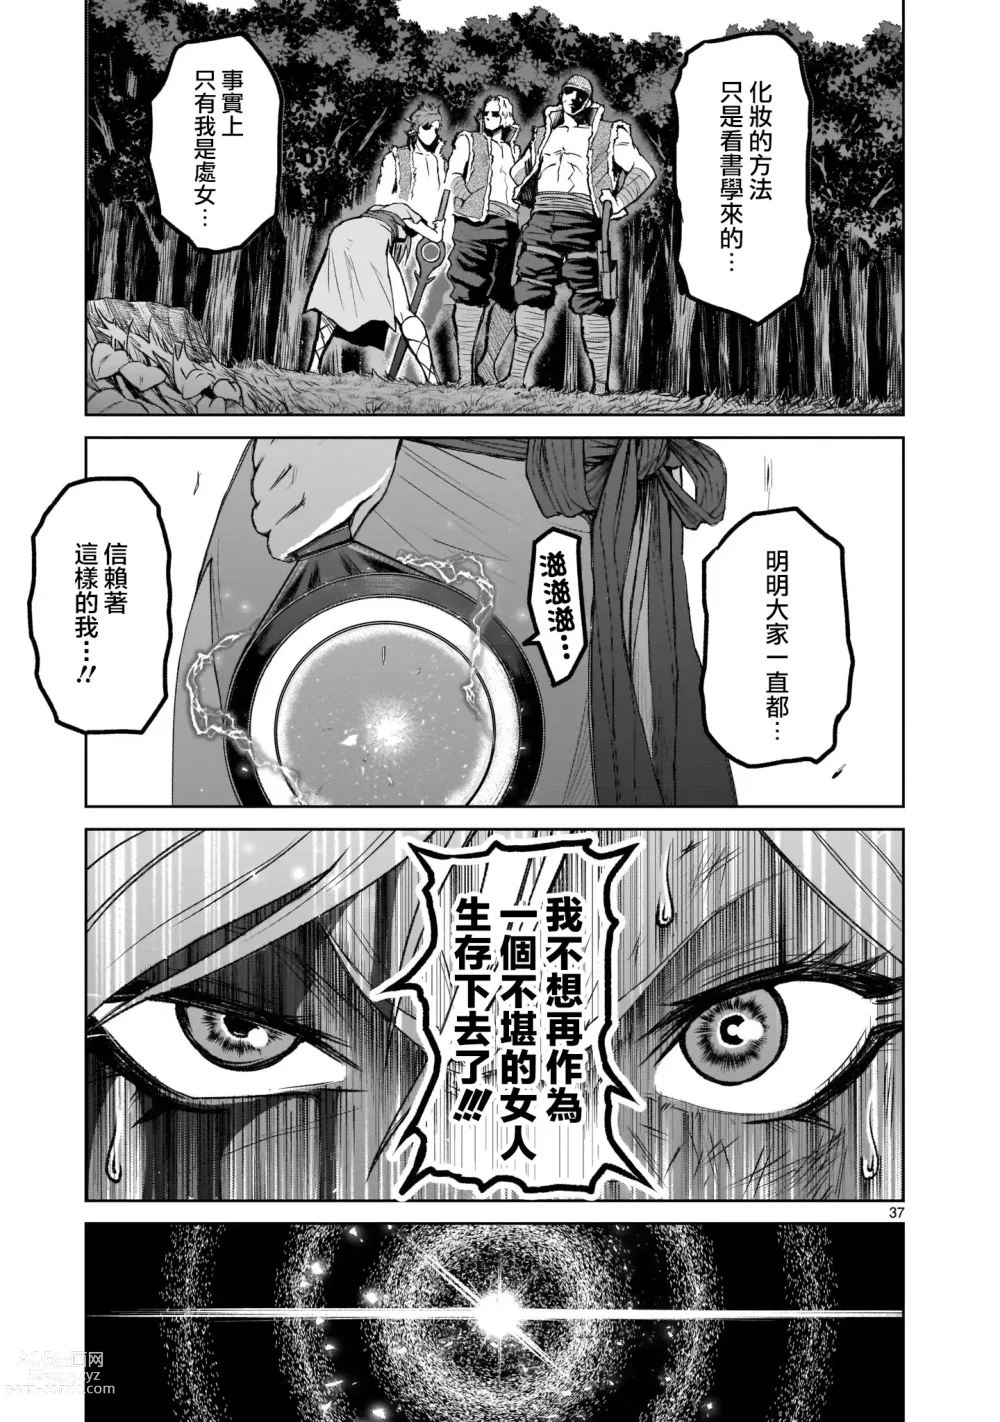 Page 34 of doujinshi 蔷薇园传奇 01Chinese